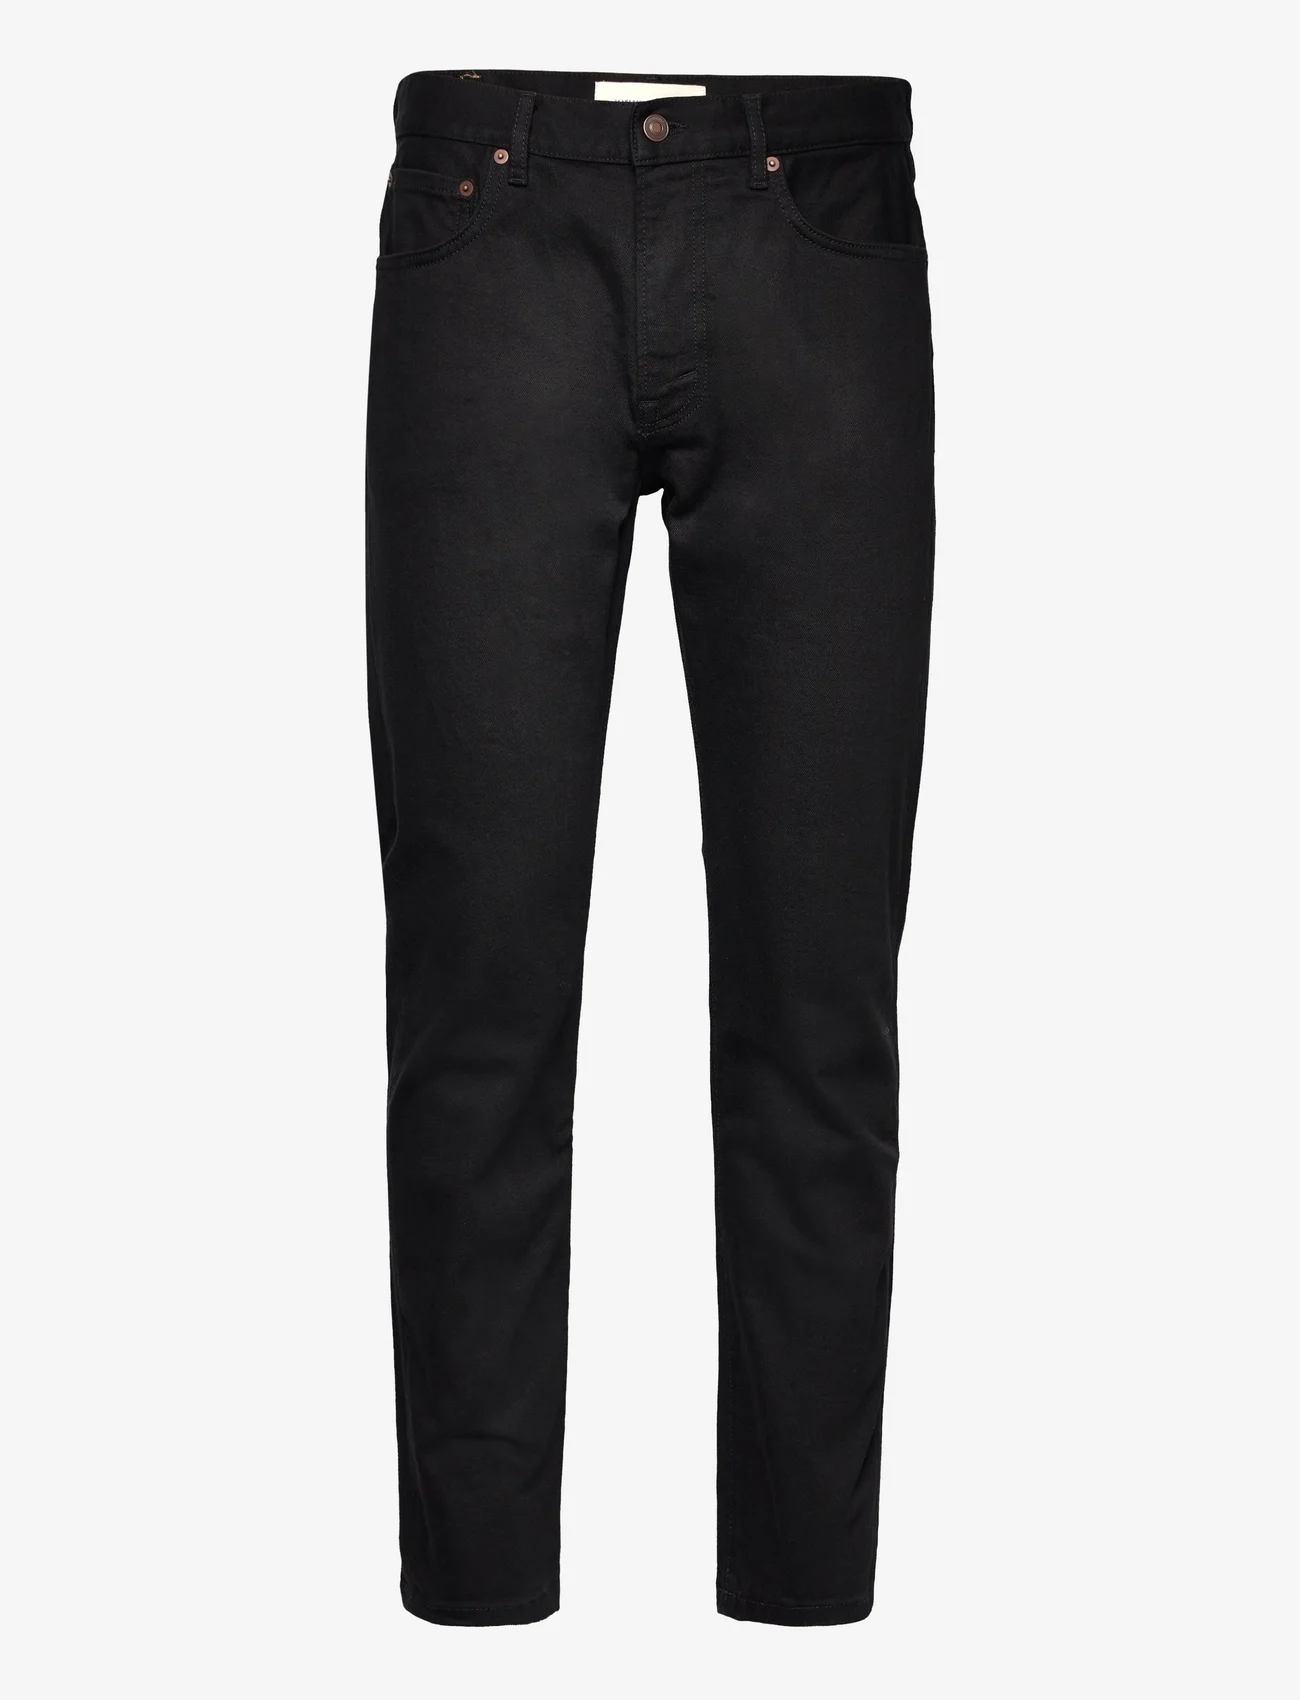 Jeanerica - TM005 Tapered - tapered jeans - rinse stay black - 0